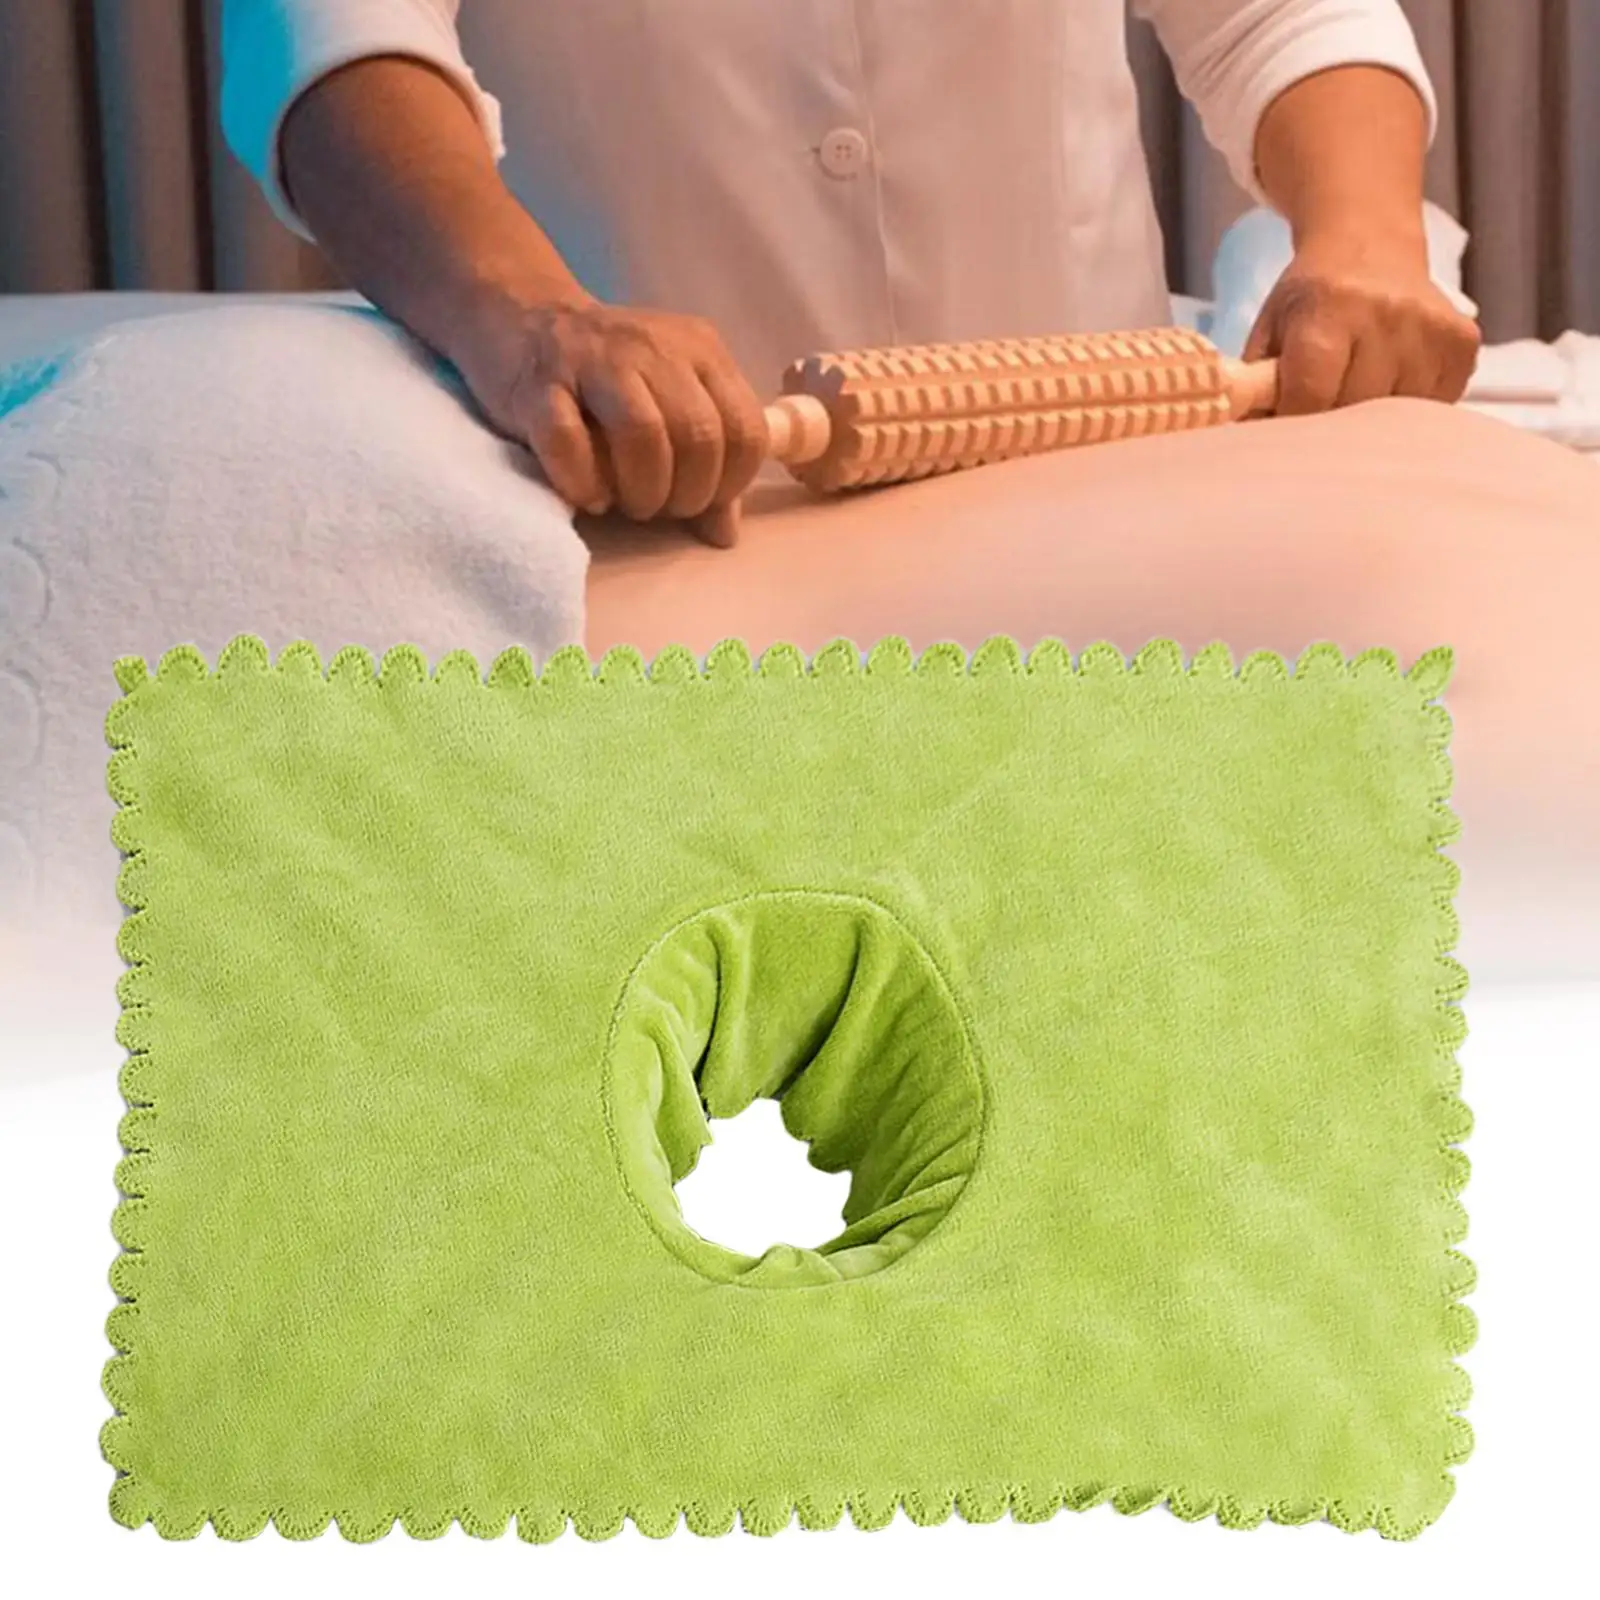 Massage Table Sheet Covers with Face Hole Satin Strip Polyester Fiber Soft